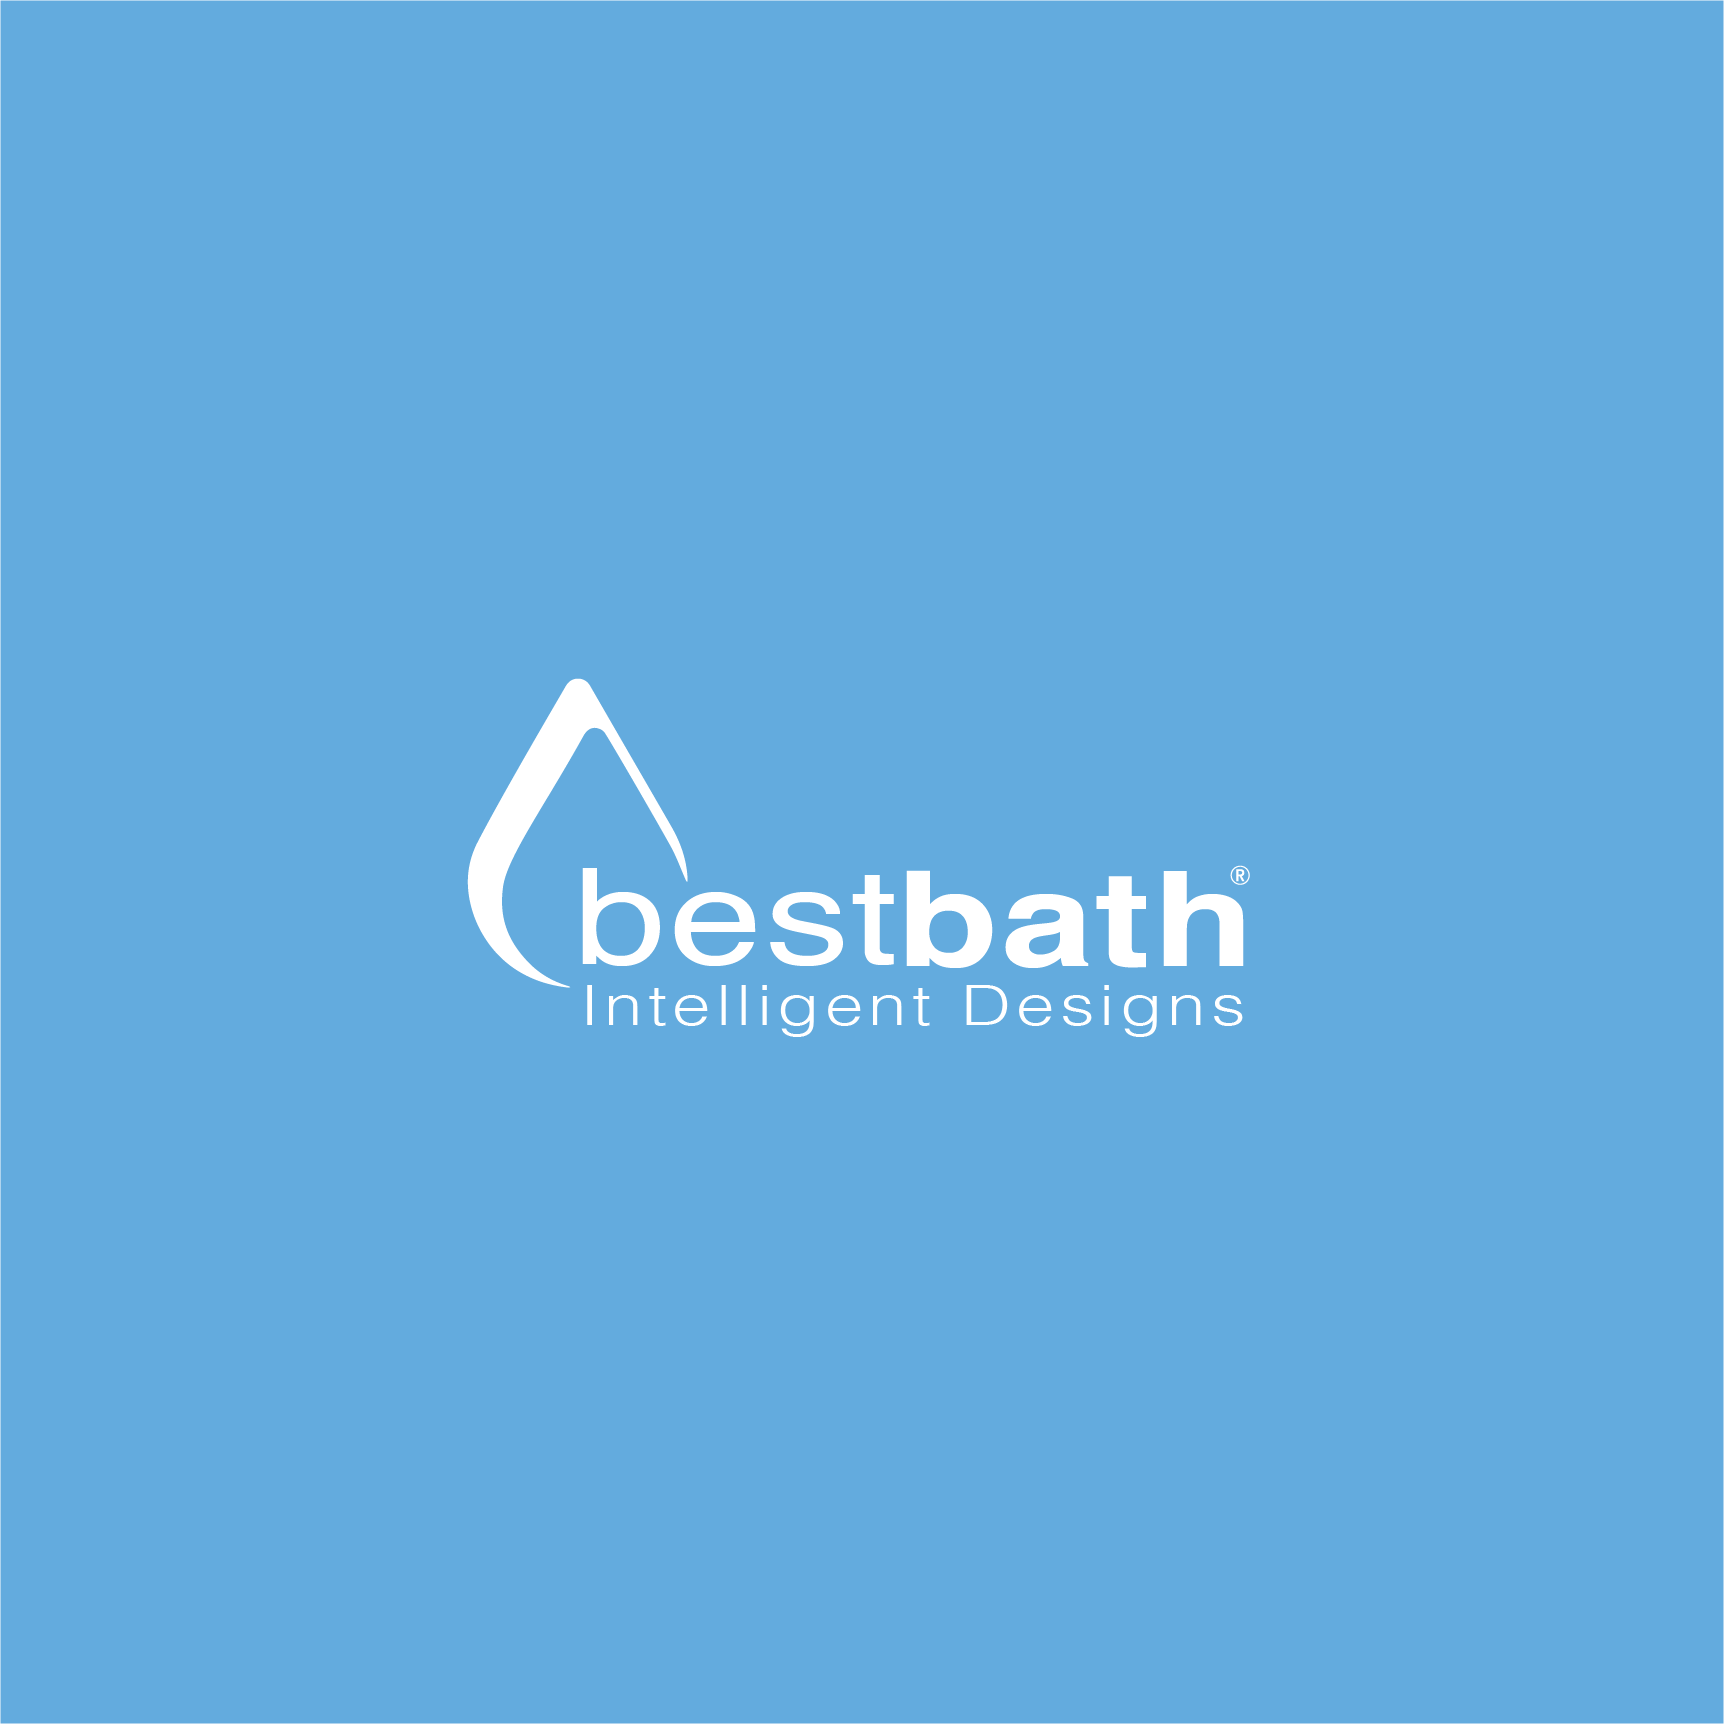 Universal Bath Design: Light Your Bathroom for All Ages and Abilities